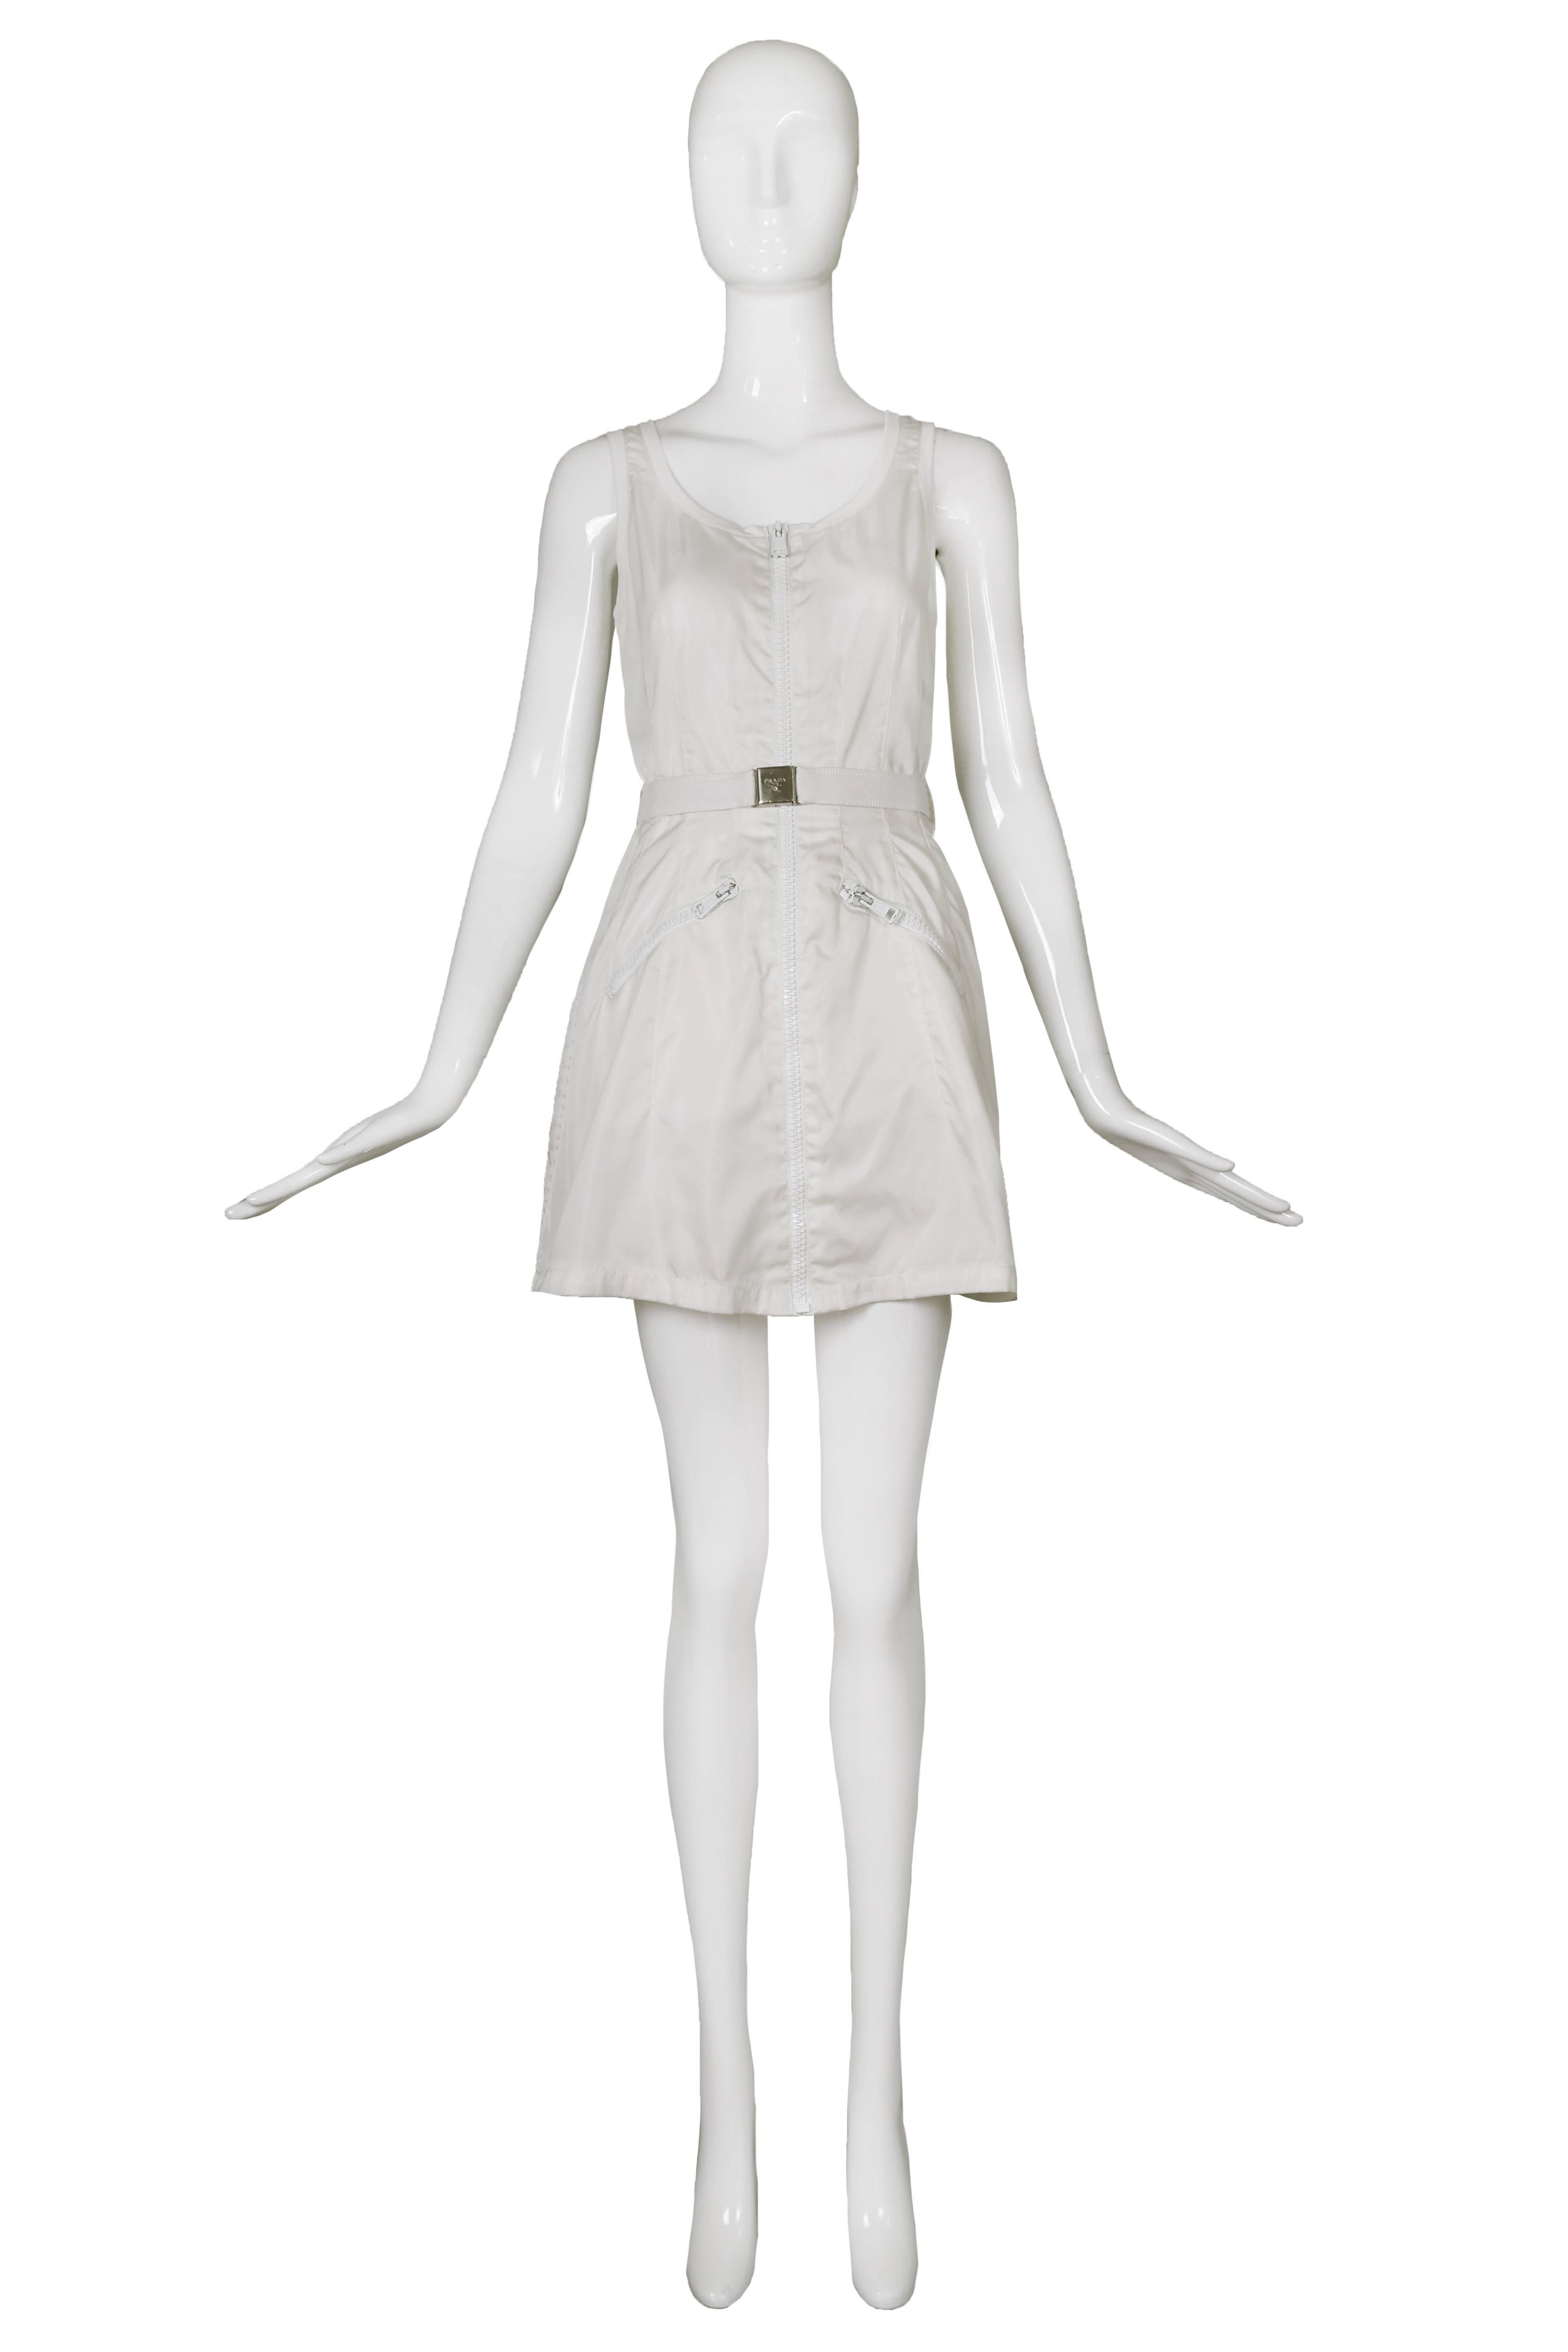 Prada white mini dress with white zipper closure up center front, angled white zippered frontal pockets and elastic belt with metal Prada logo buckle. In very good to excellent condition with almost imperceptible, faded water mark at the back. Size